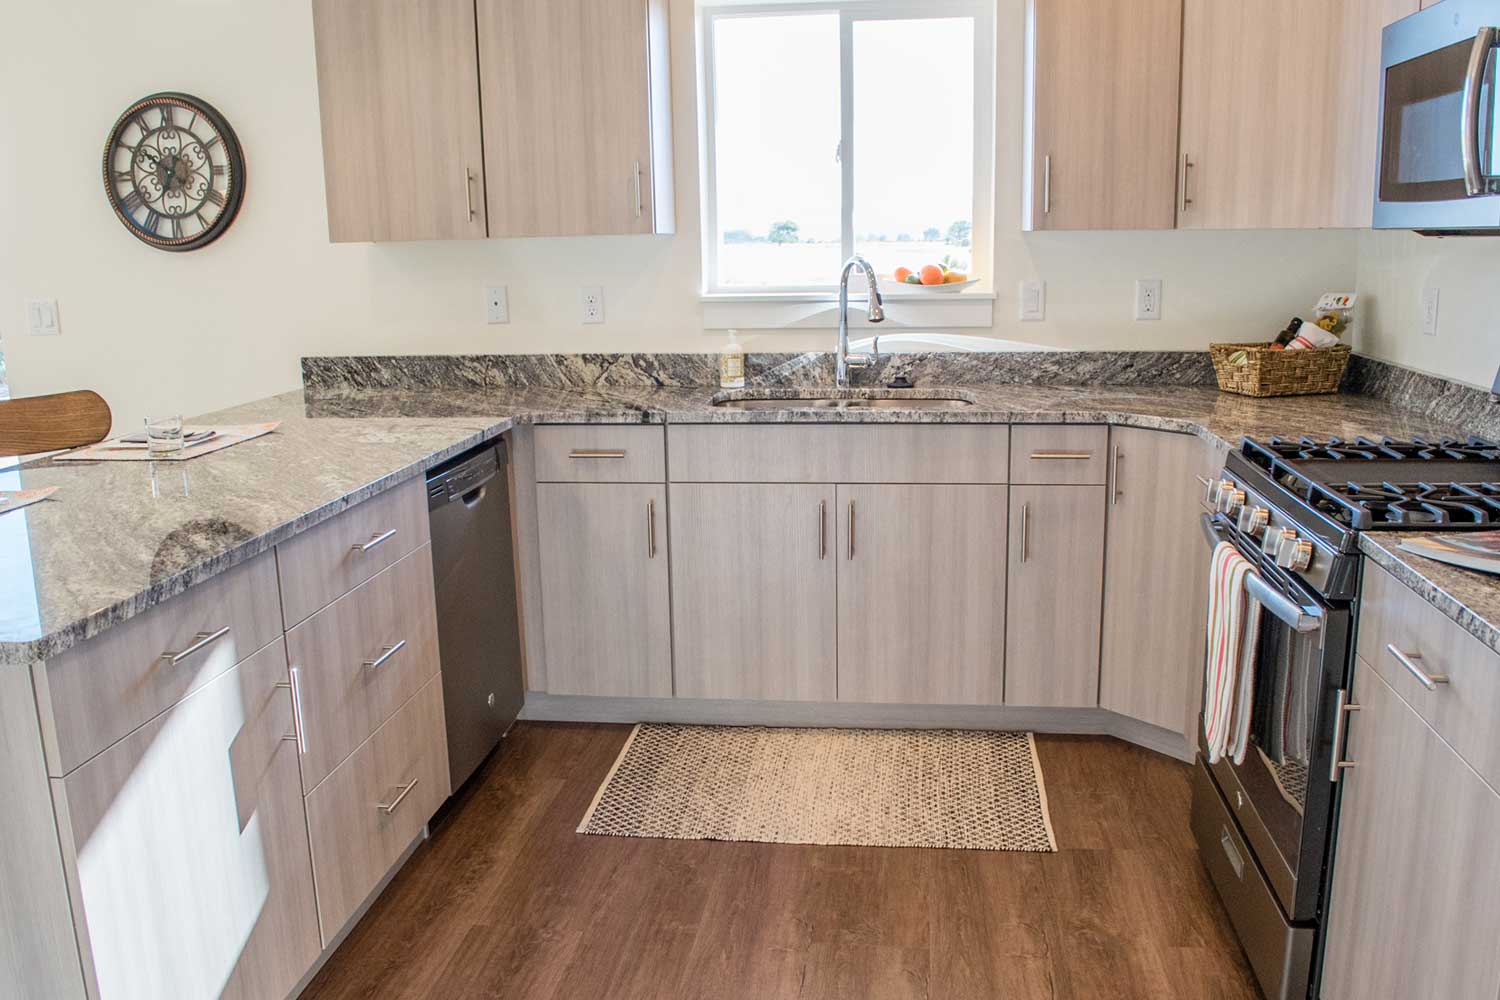 kitchen sink, granite counter tops, and light brown cabinets